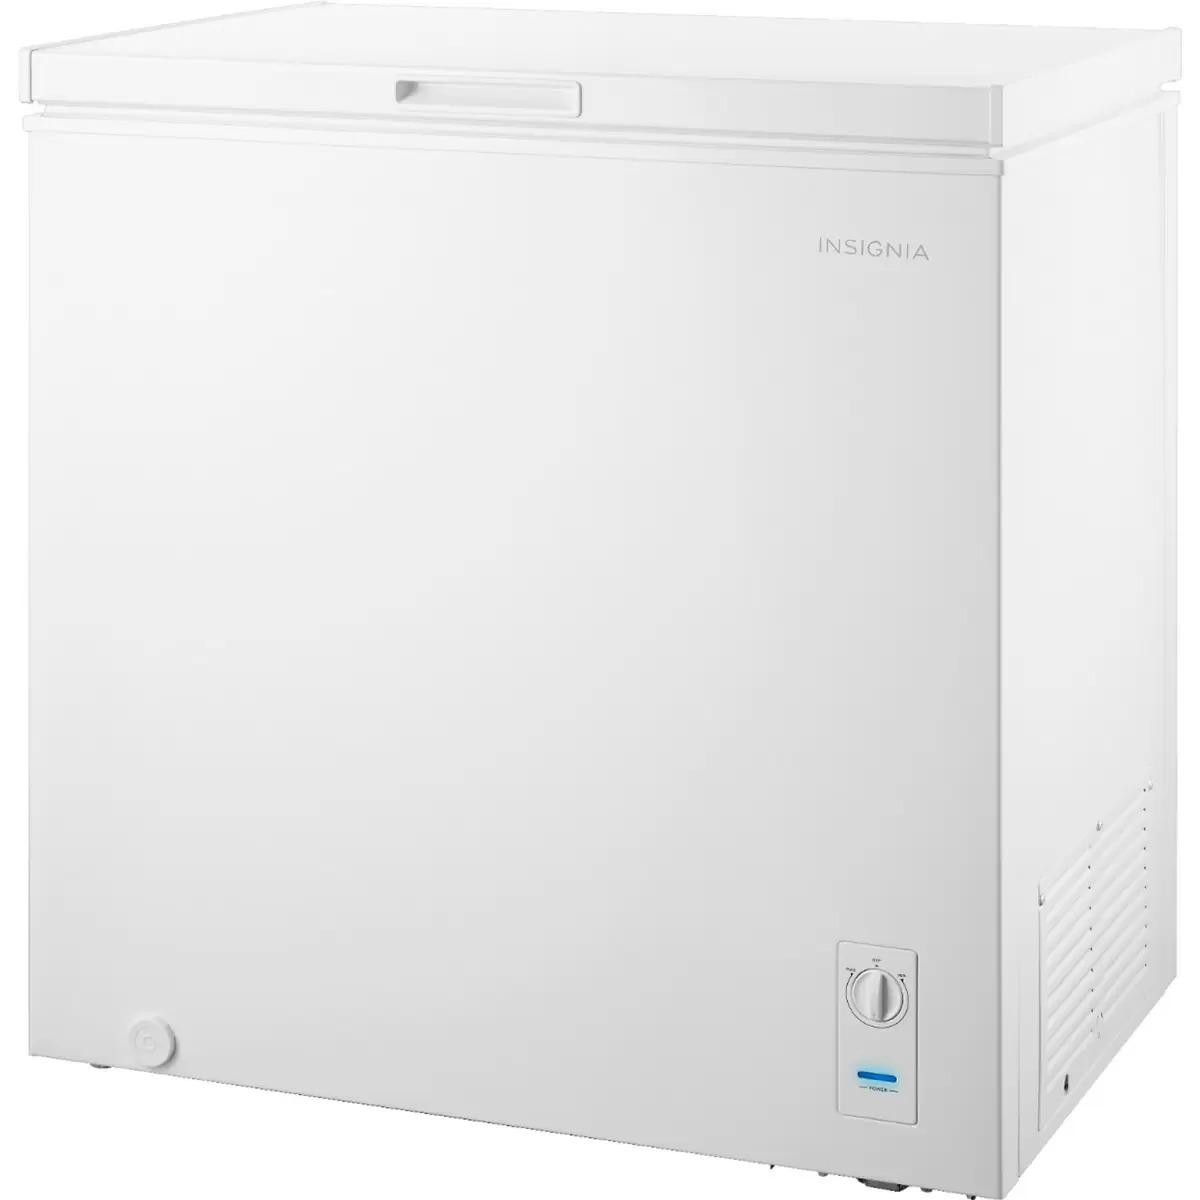 Insignia Chest Freezer for $199.99 Shipped